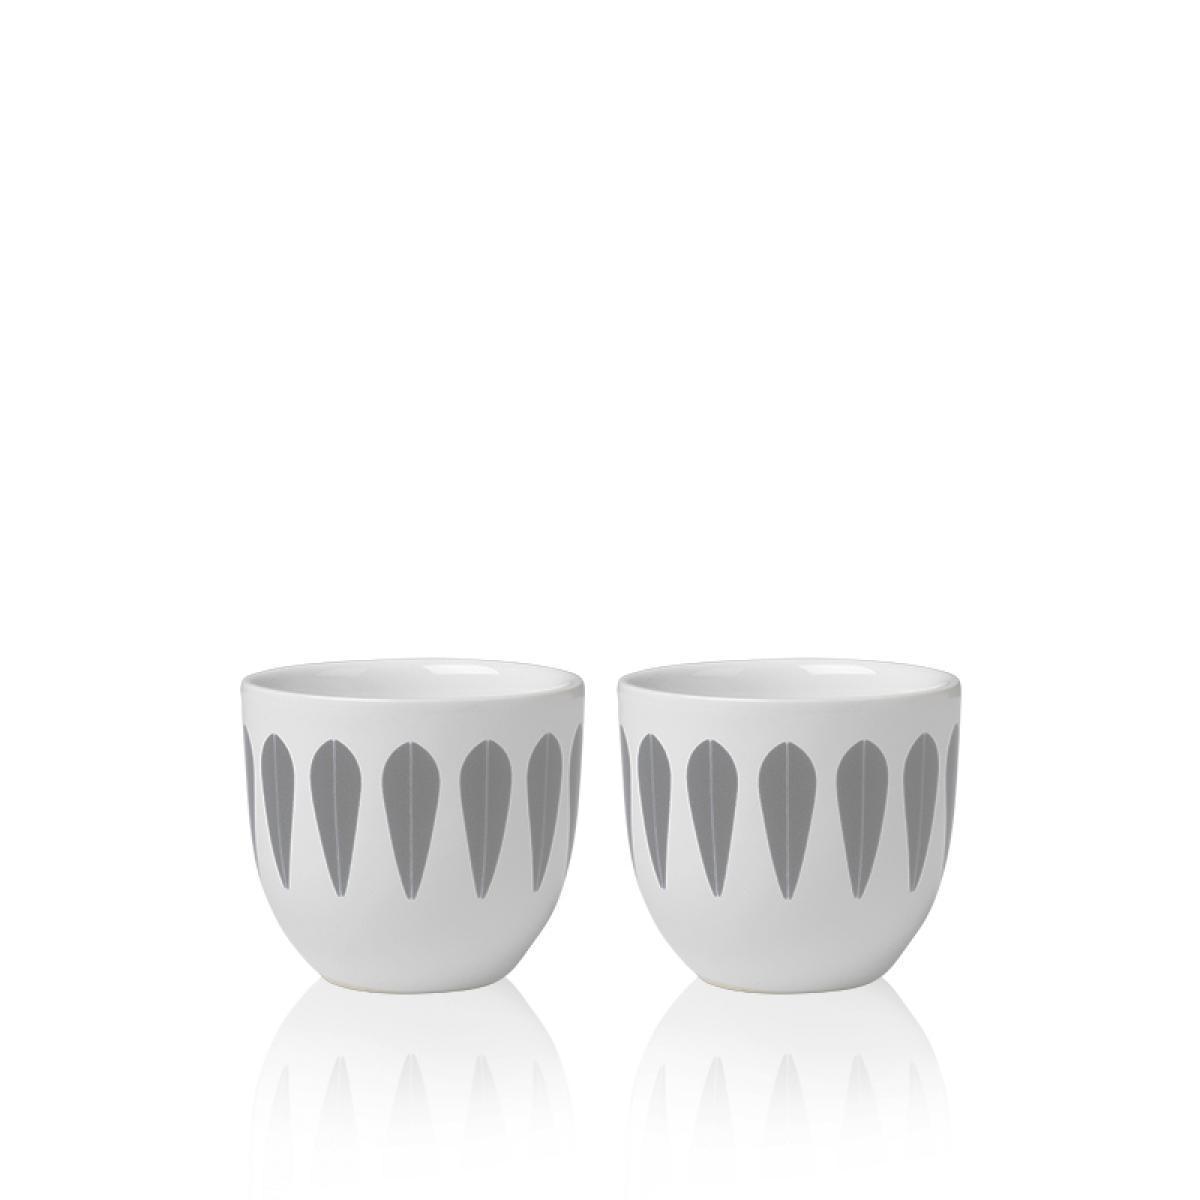 Lucie Kaas Arne Clausen Egg Cup Gray, 2 pc's.